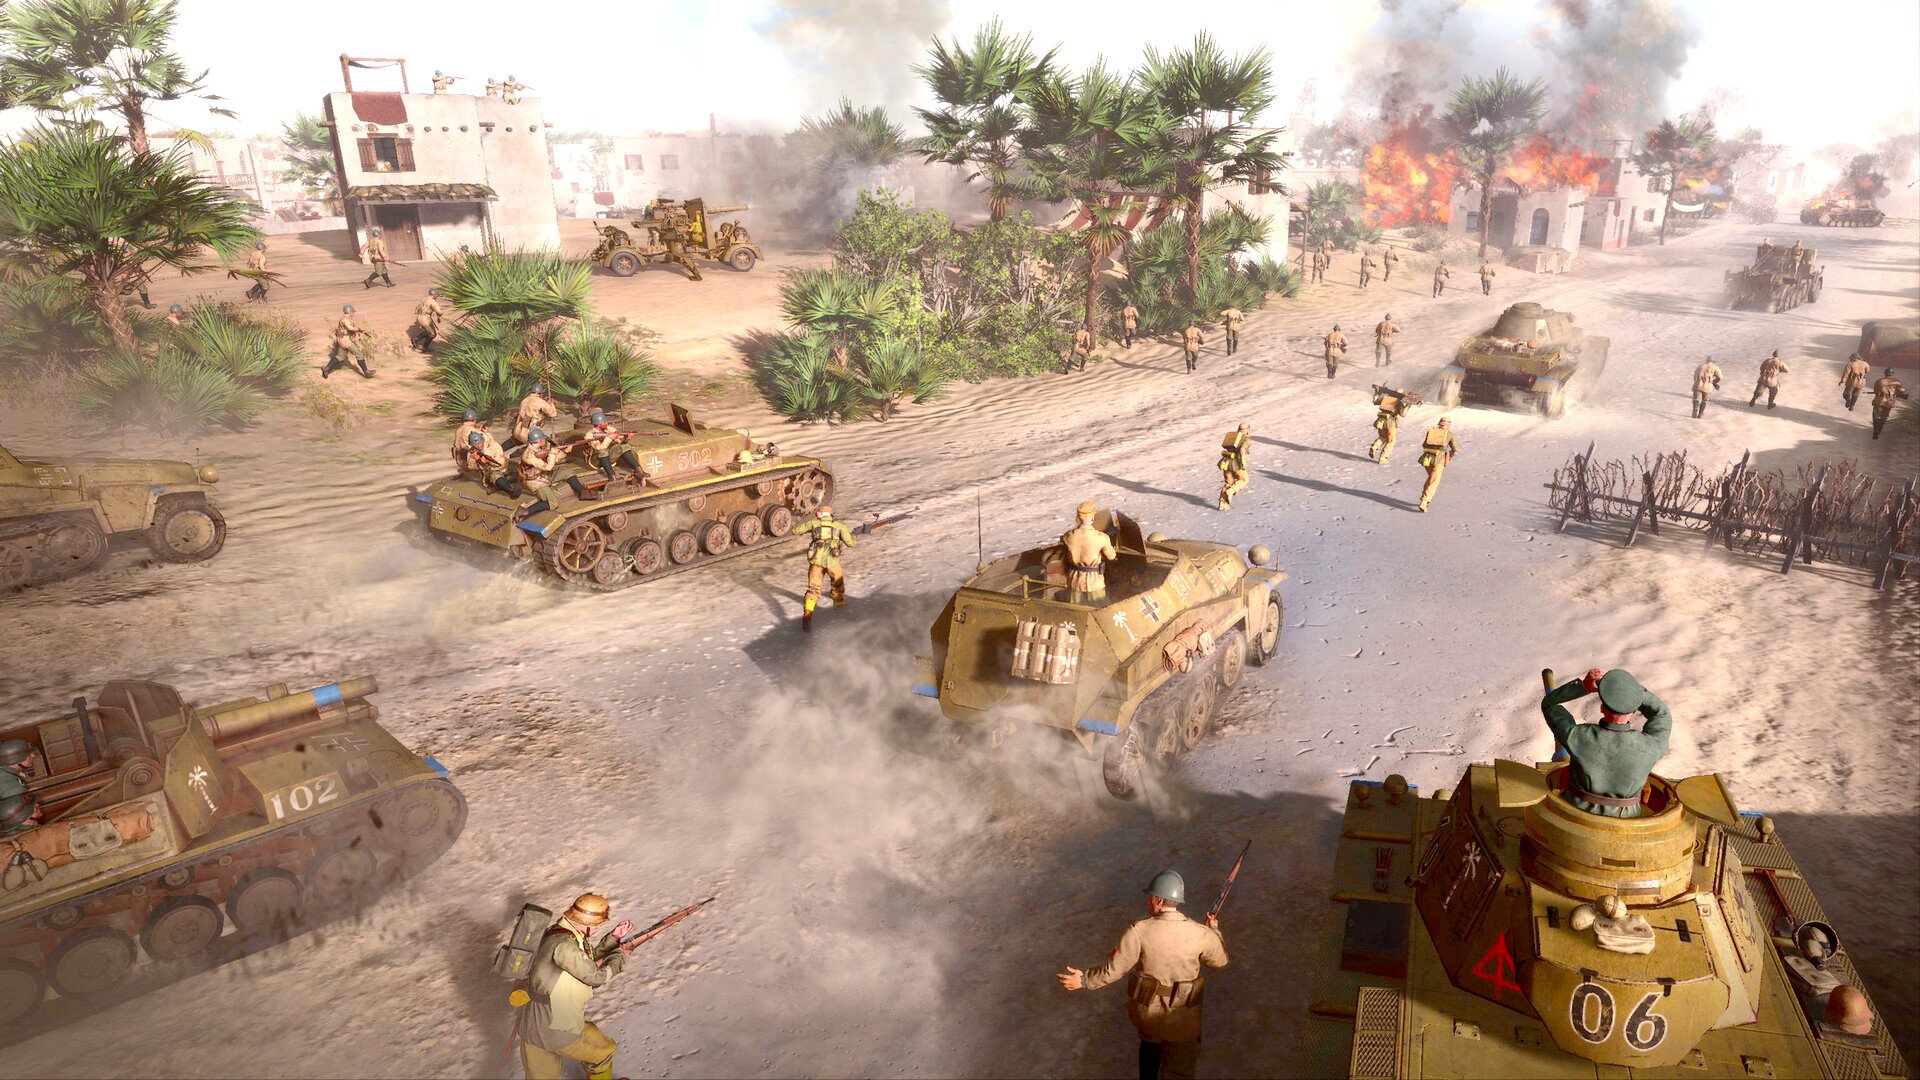 best RTS games guide - Official SEGA screenshot from Company of Heroes 3 showing various Deutsche Afrika Korps (DAK) units advancing together for an attack in a North African battlezone